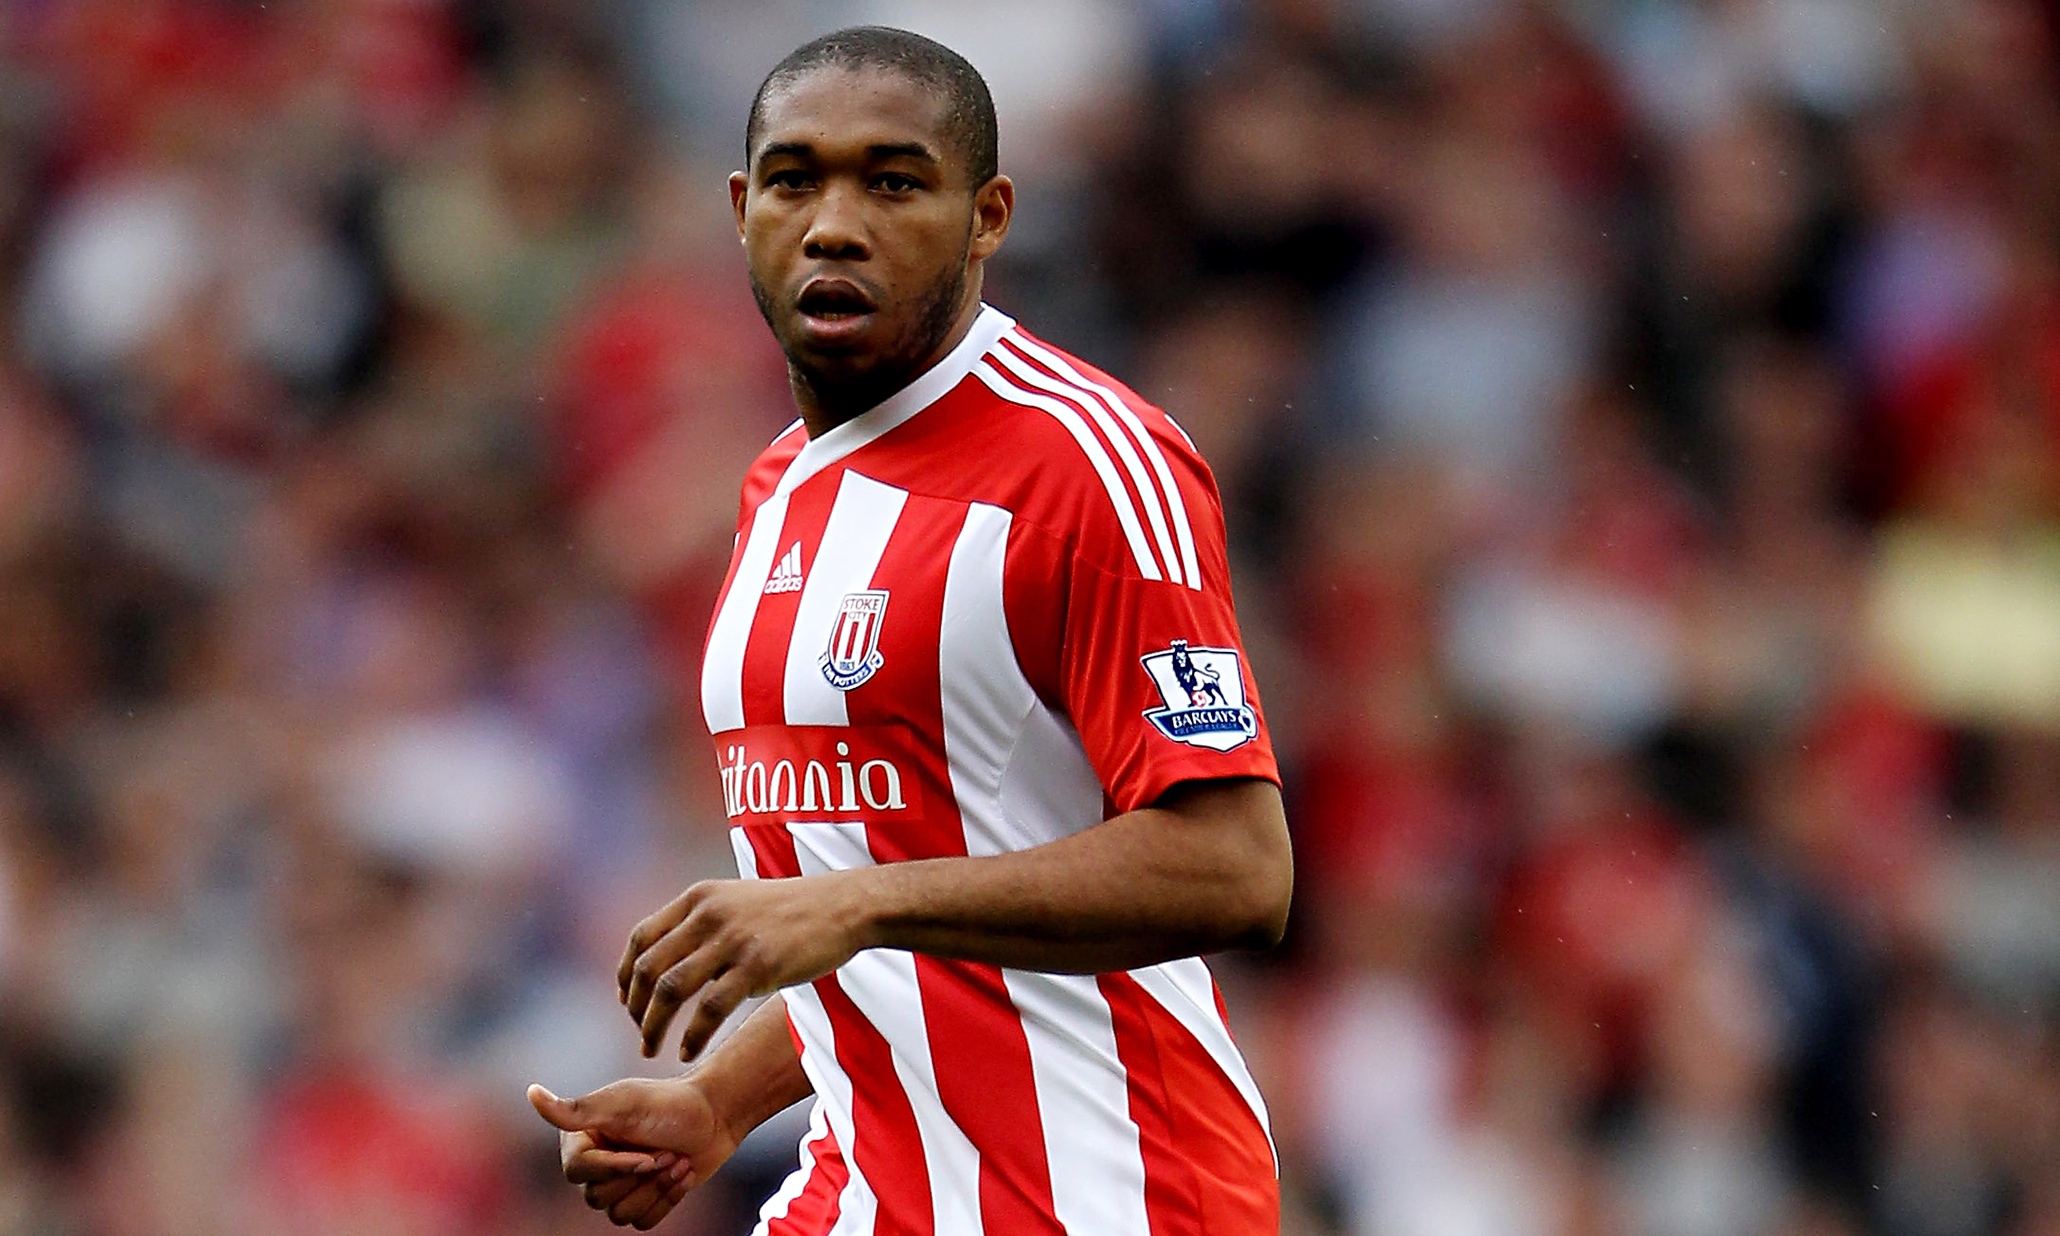 Wilson Palacios and Thomas Sorensen among players released by Stoke